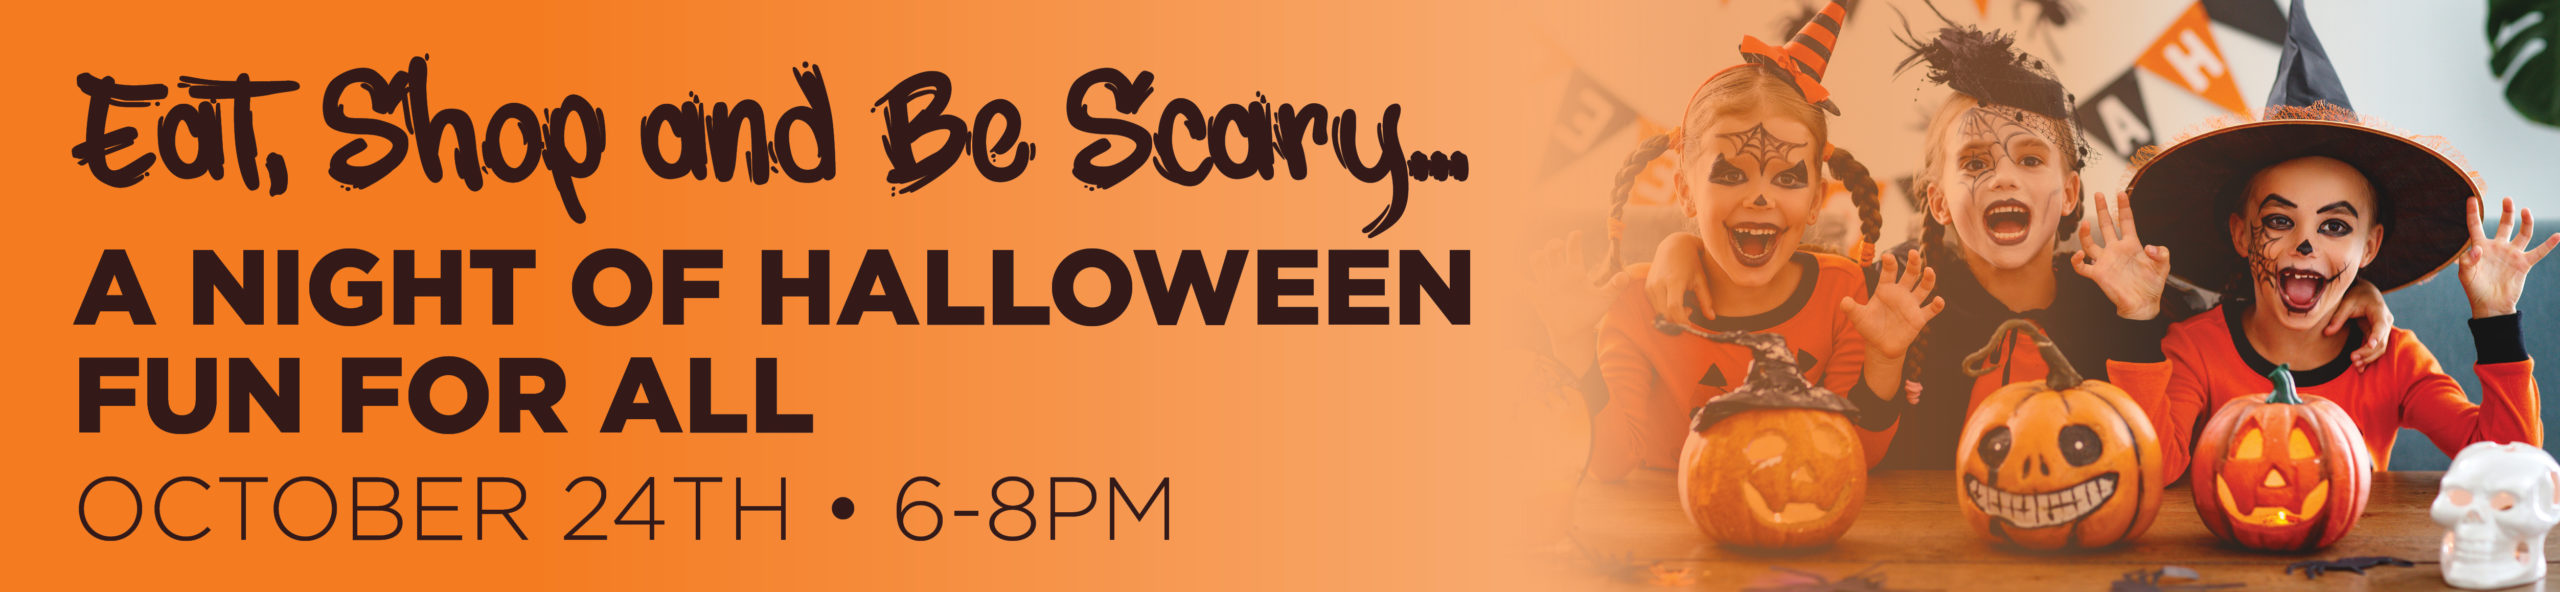 Eat, Shop and Be Scary… A Night of Halloween Fun For All